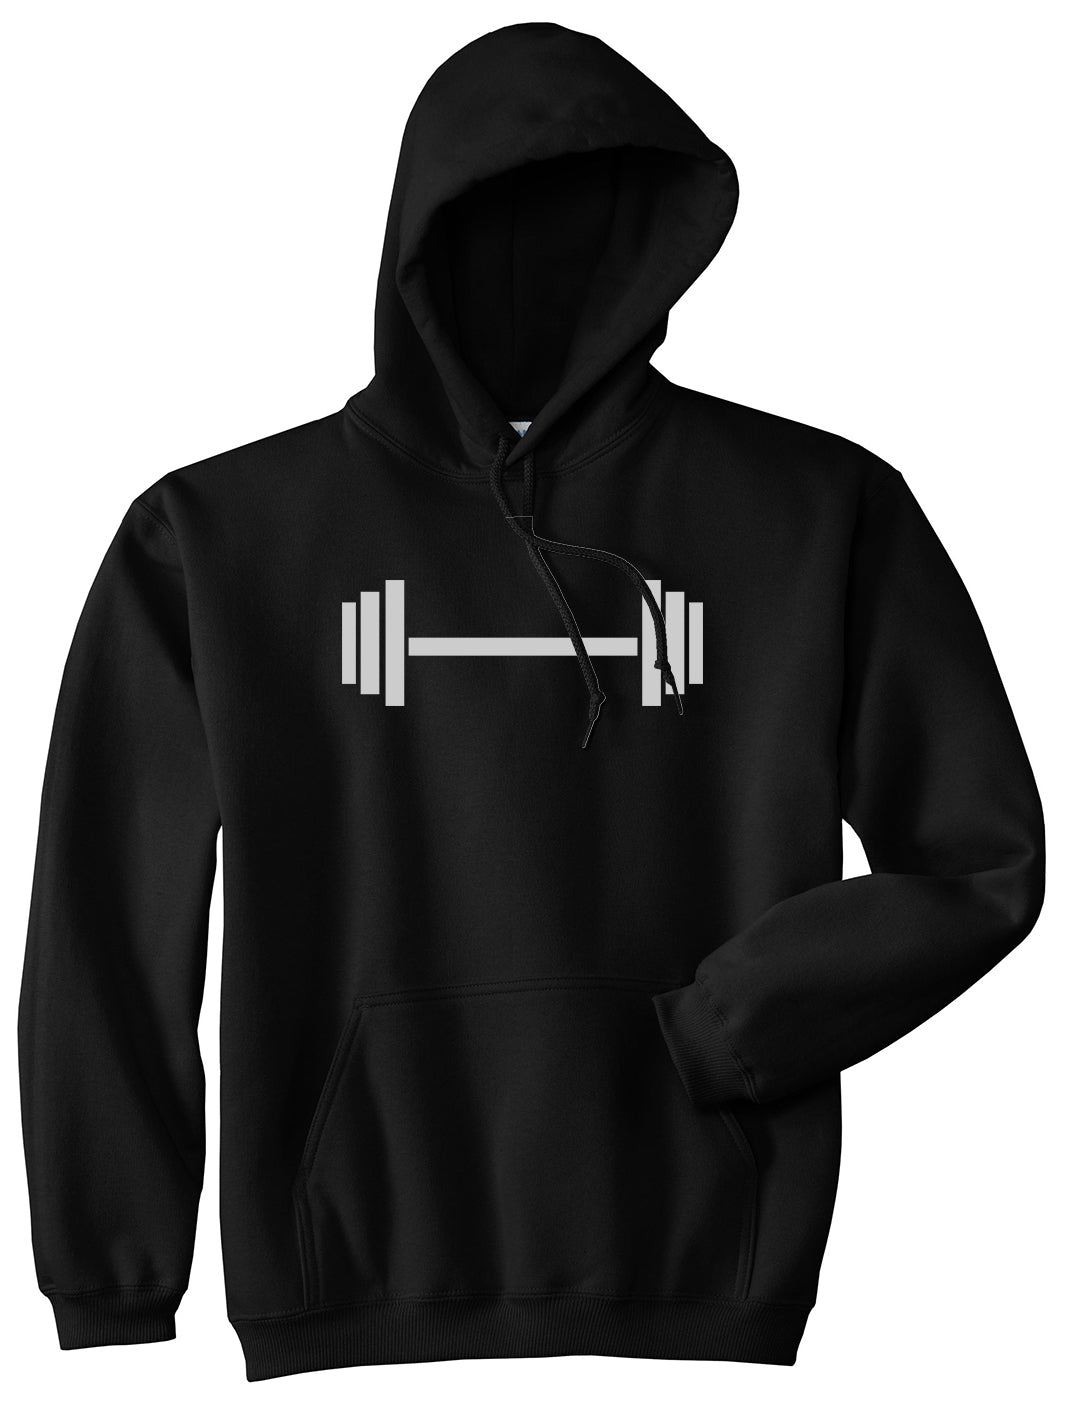 Barbell Workout Gym Black Pullover Hoodie by Kings Of NY